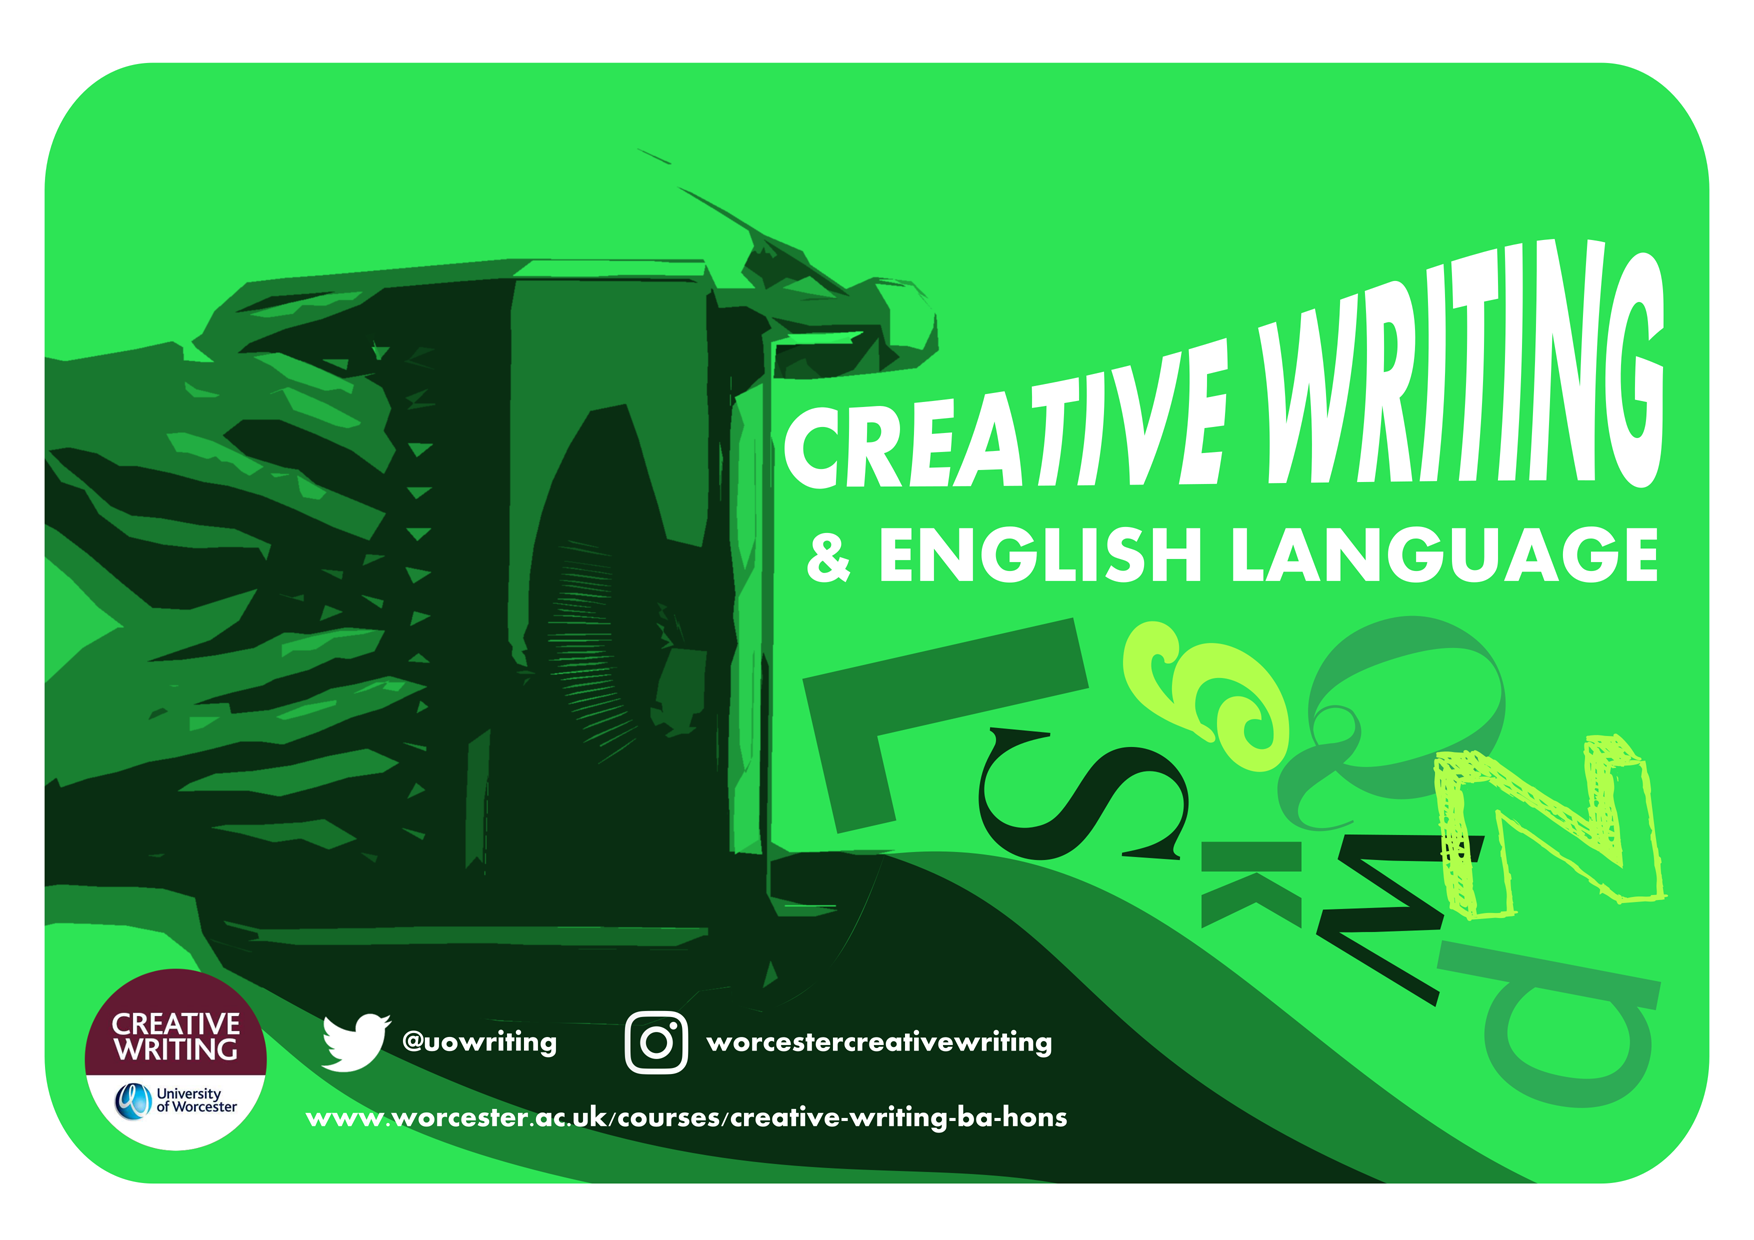 discuss the importance of language in creative writing